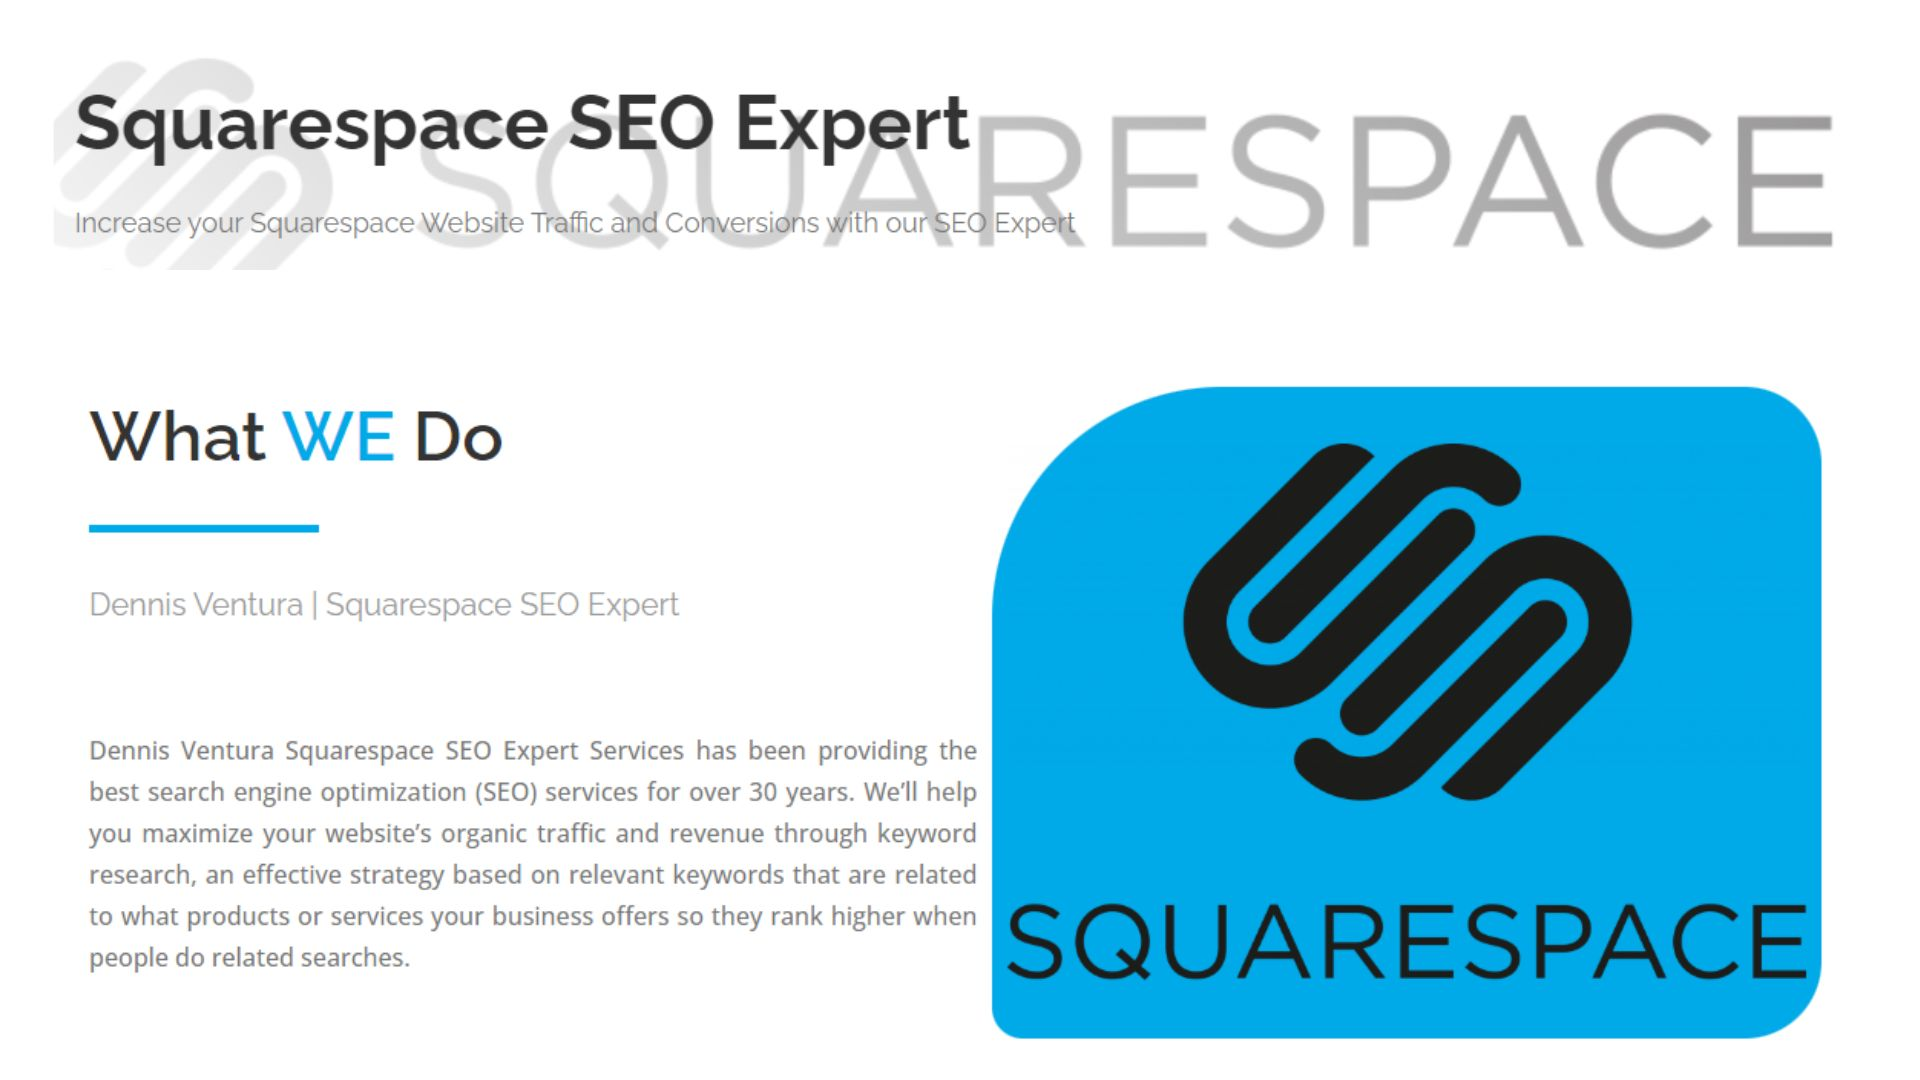 What Specific Features Does Squarespace SEO Expert Provide?